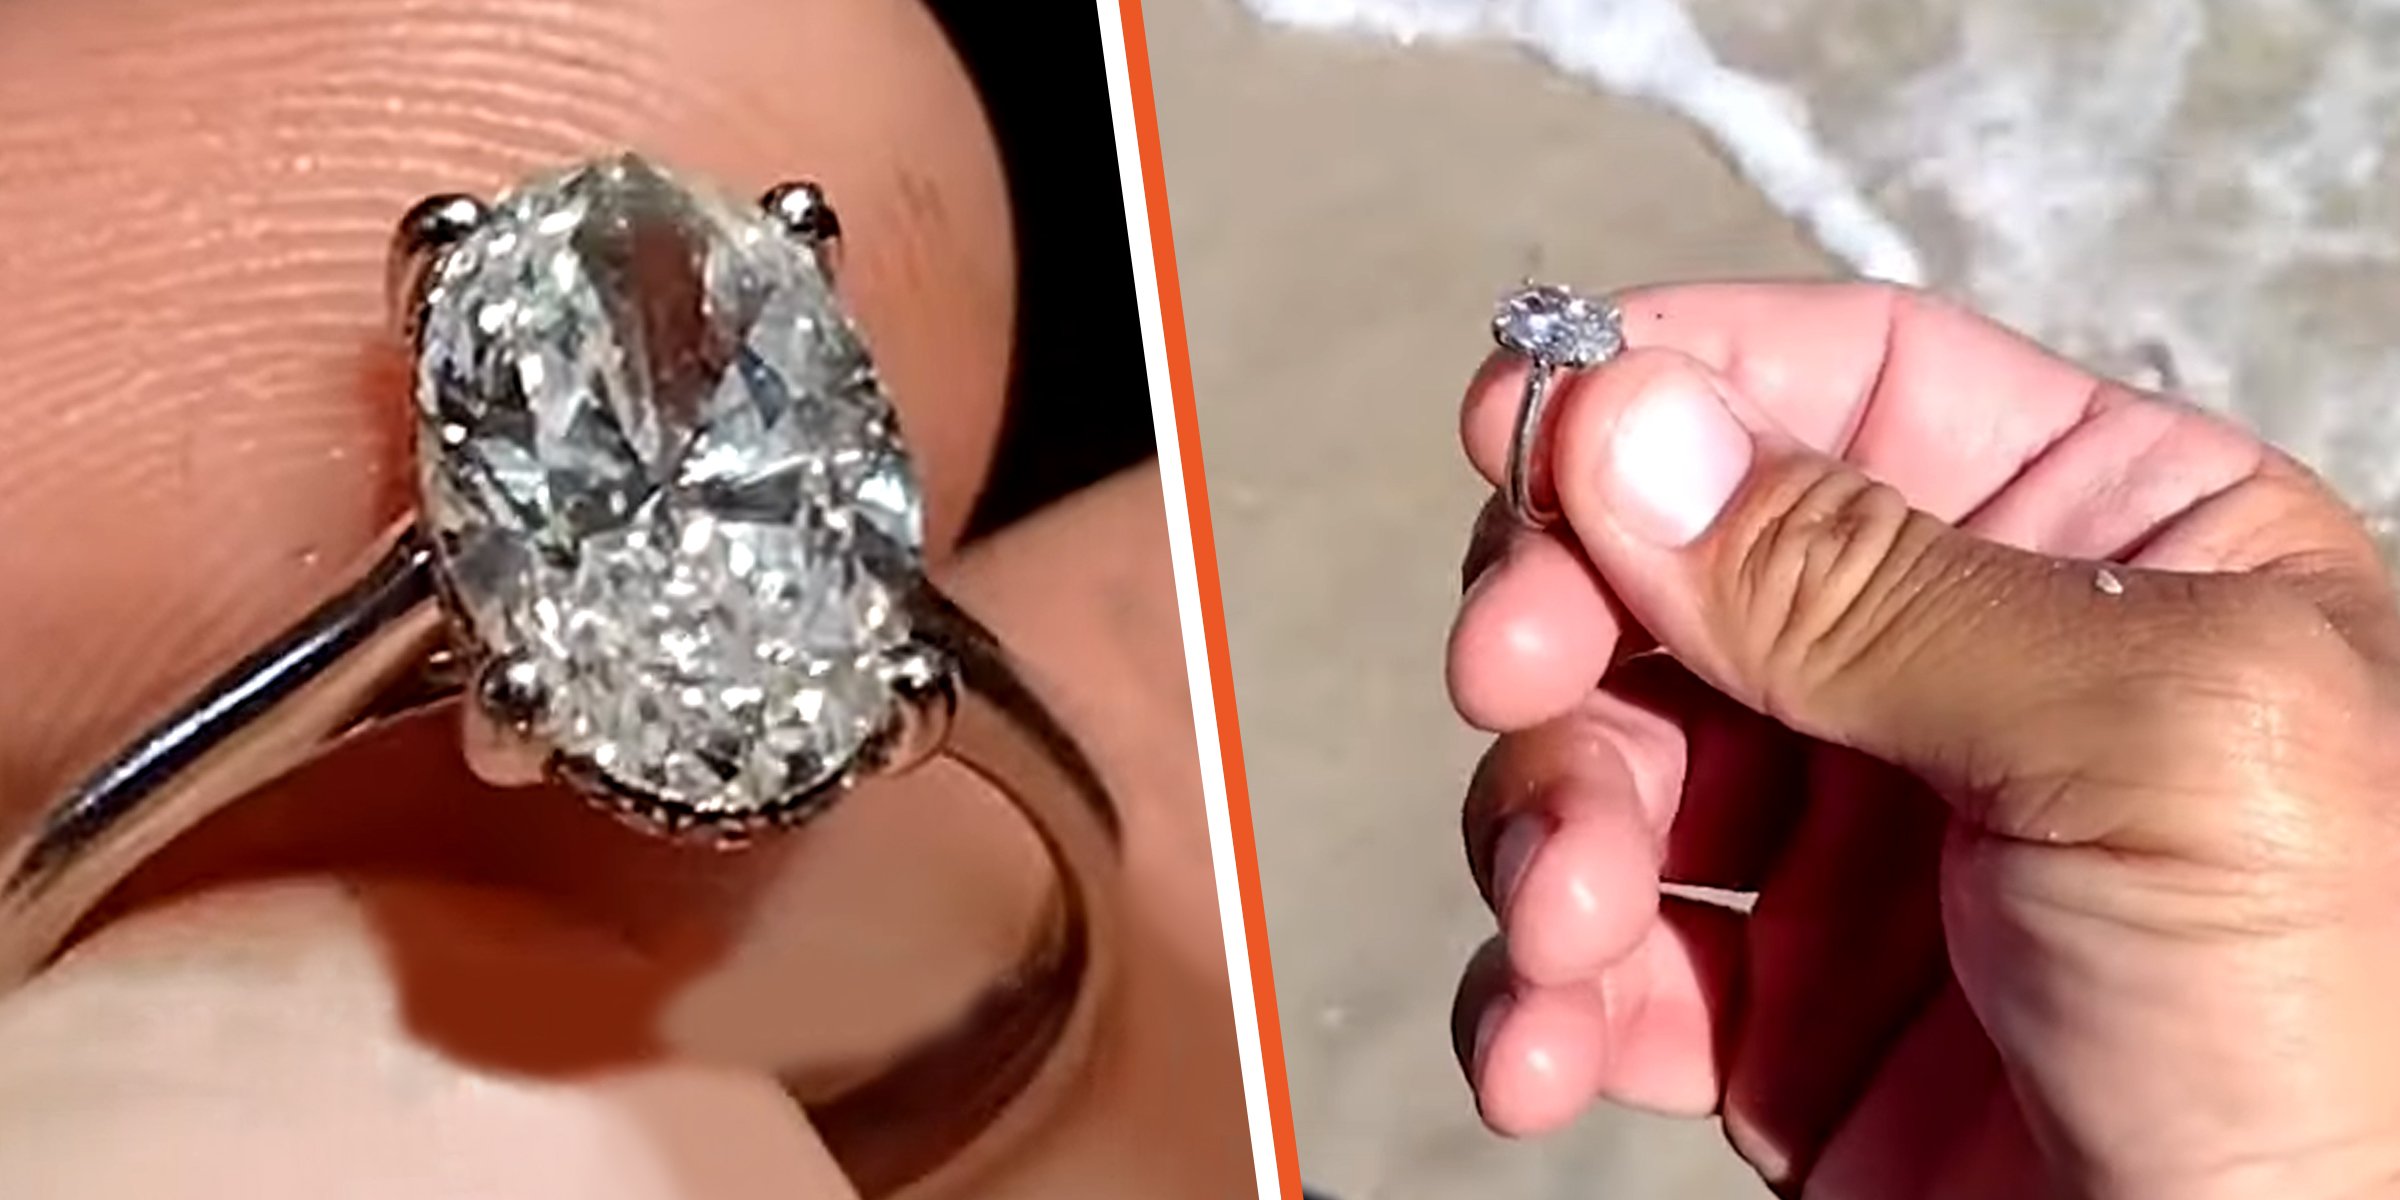 Joseph Cook found a diamond ring with his metal detector. | Source: youtube.com/theindependent